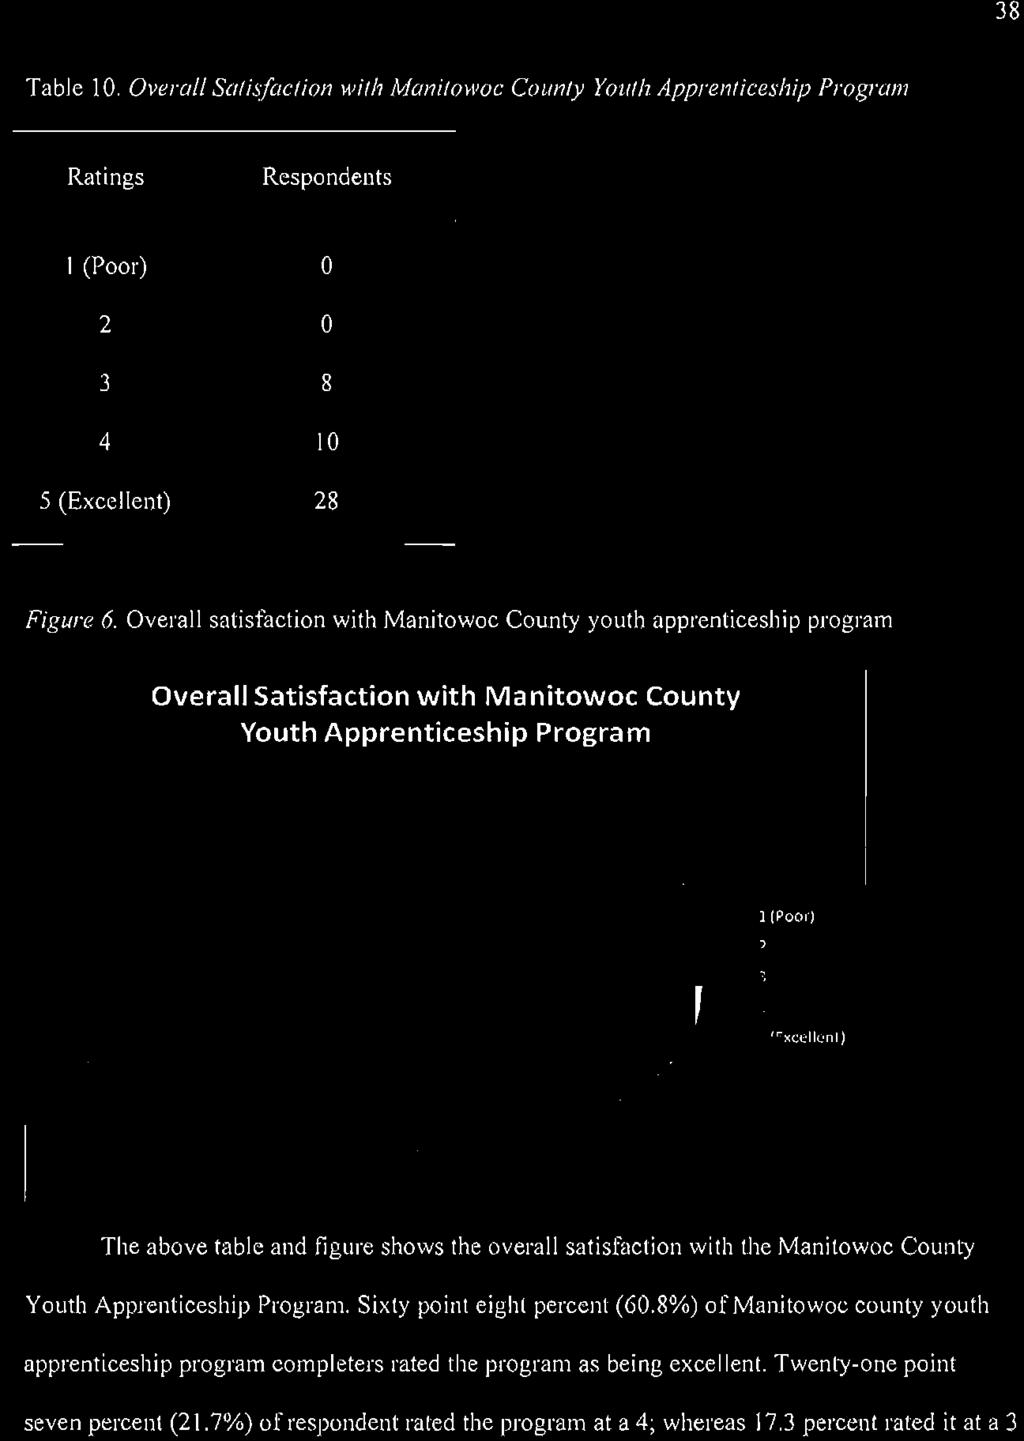 table and fi gure shows the overa ll satisfacti on with the Manitowoc County Youth Apprenti ceshi p Program. Sixty point eight percent (60.